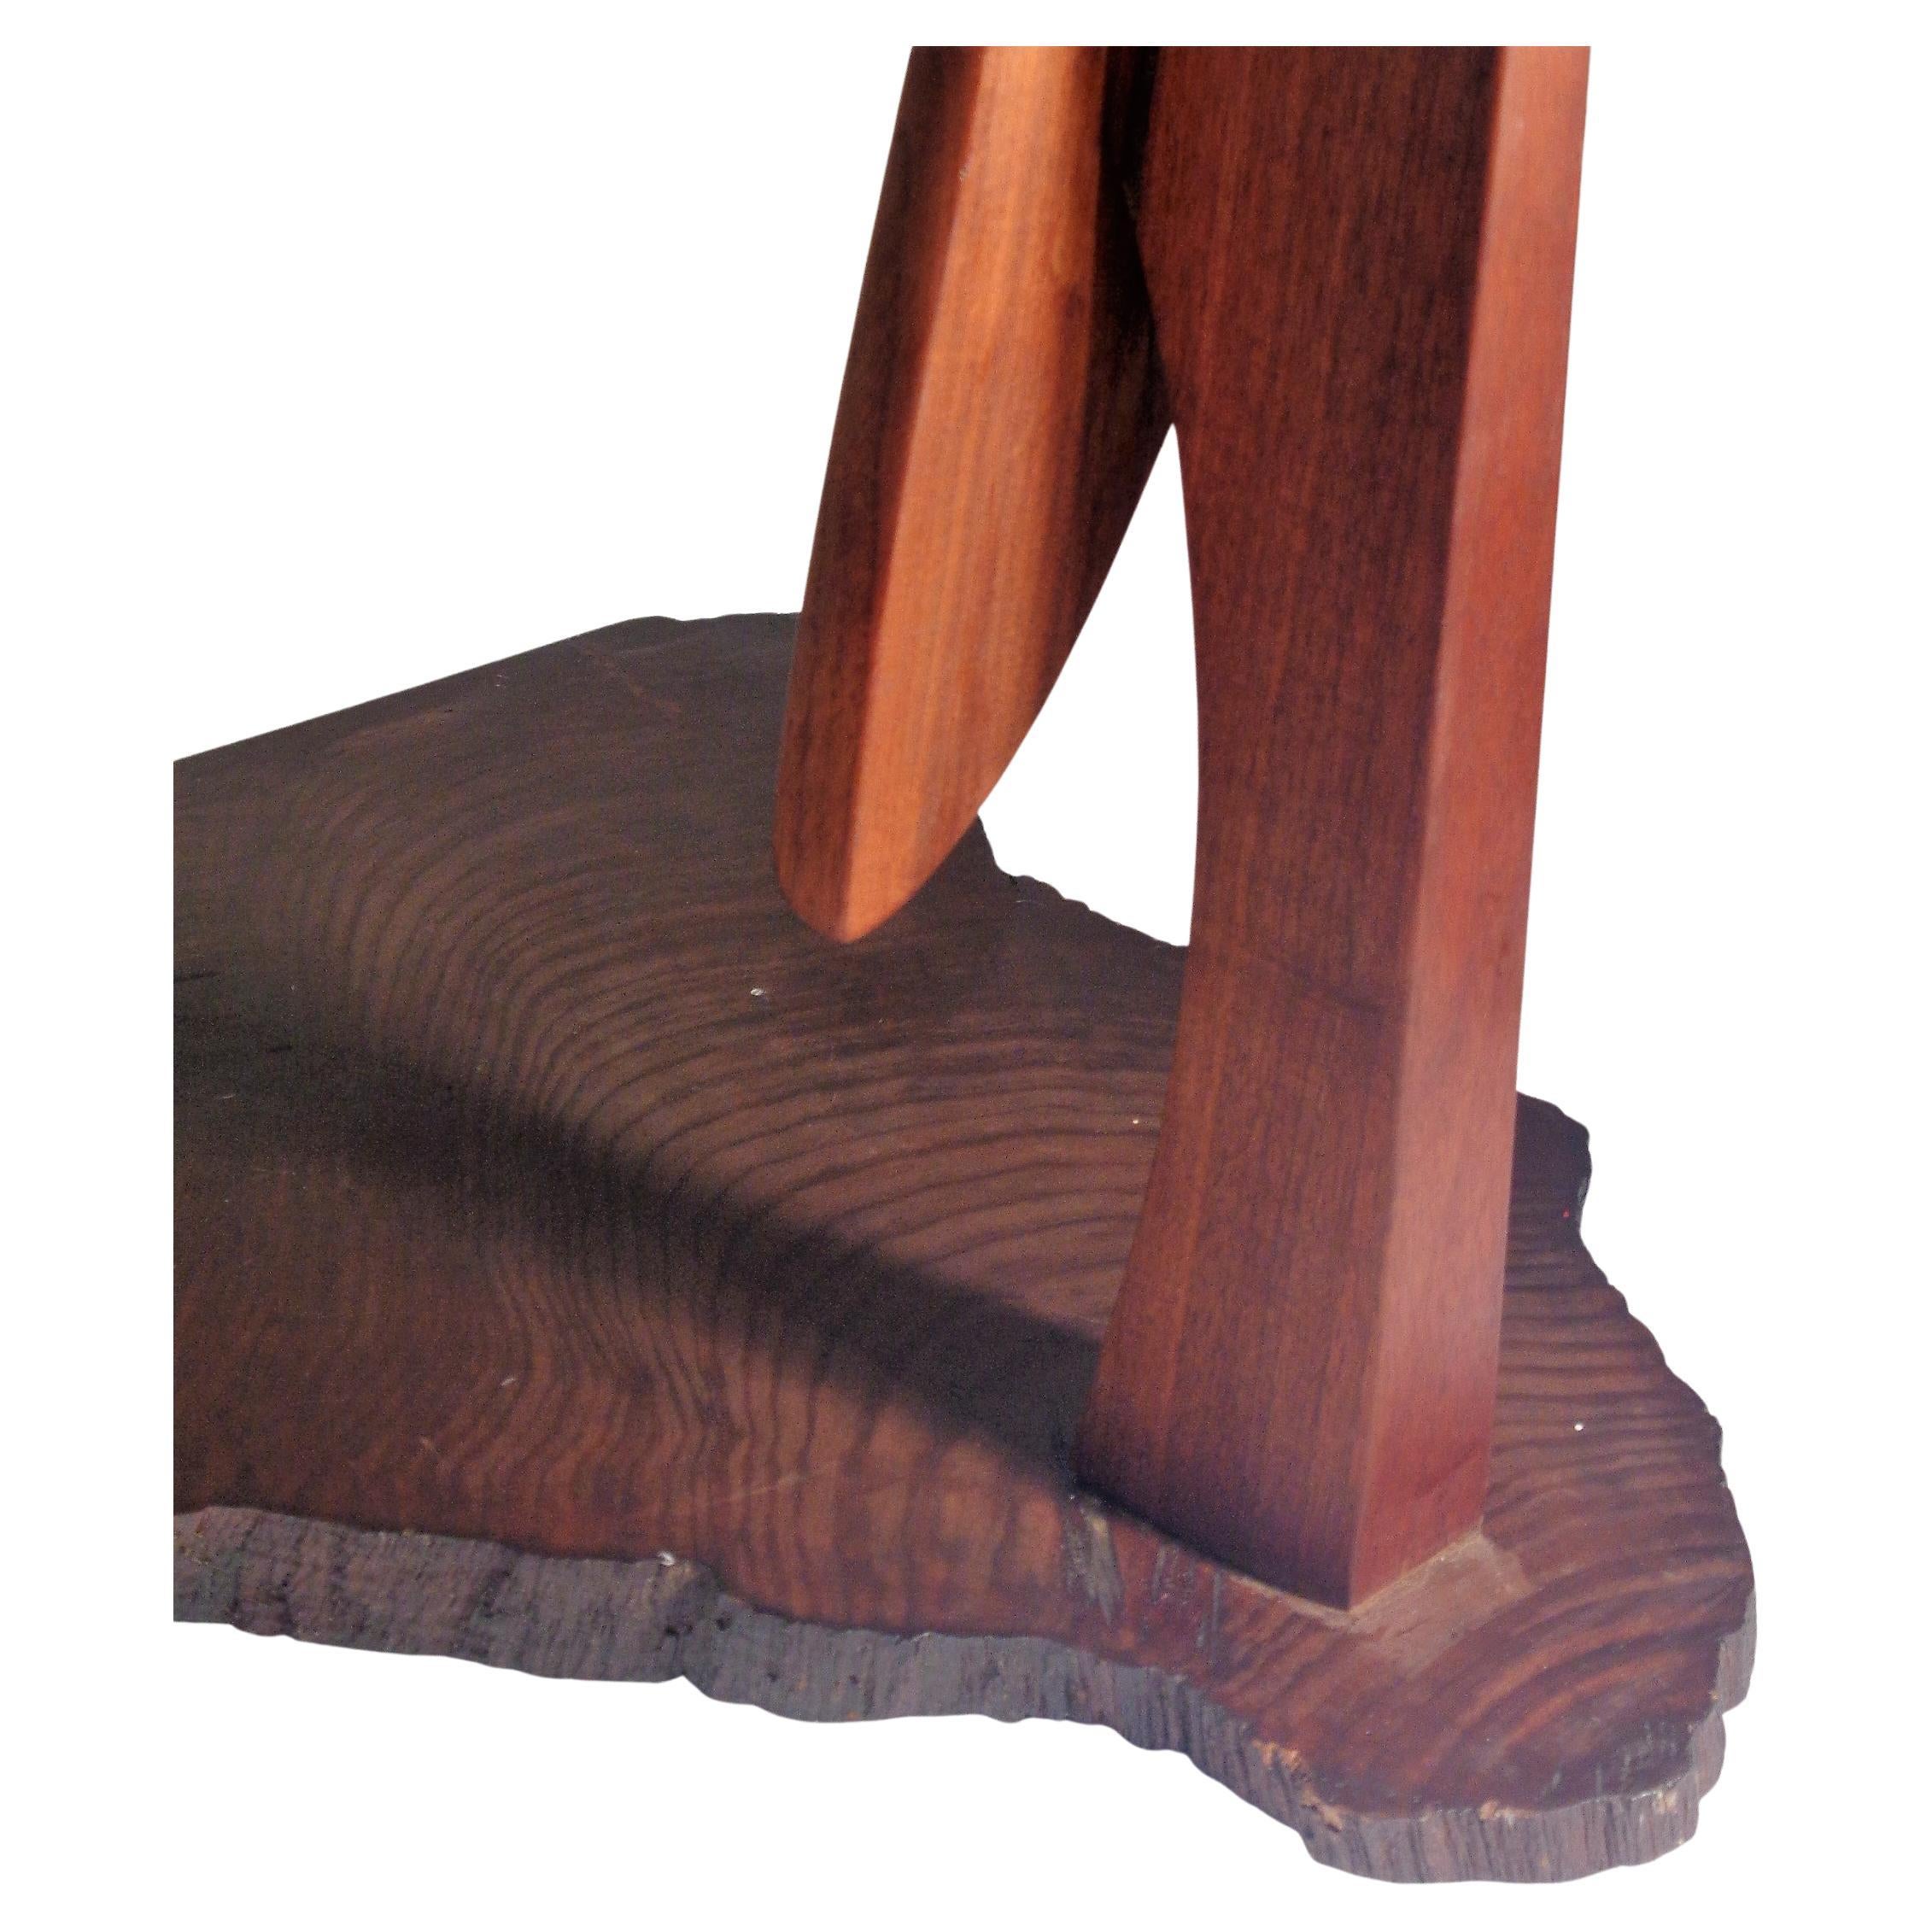 American Studio Craft Movement Modernist Abstract Wood Sculpture, 1970-1980 For Sale 3